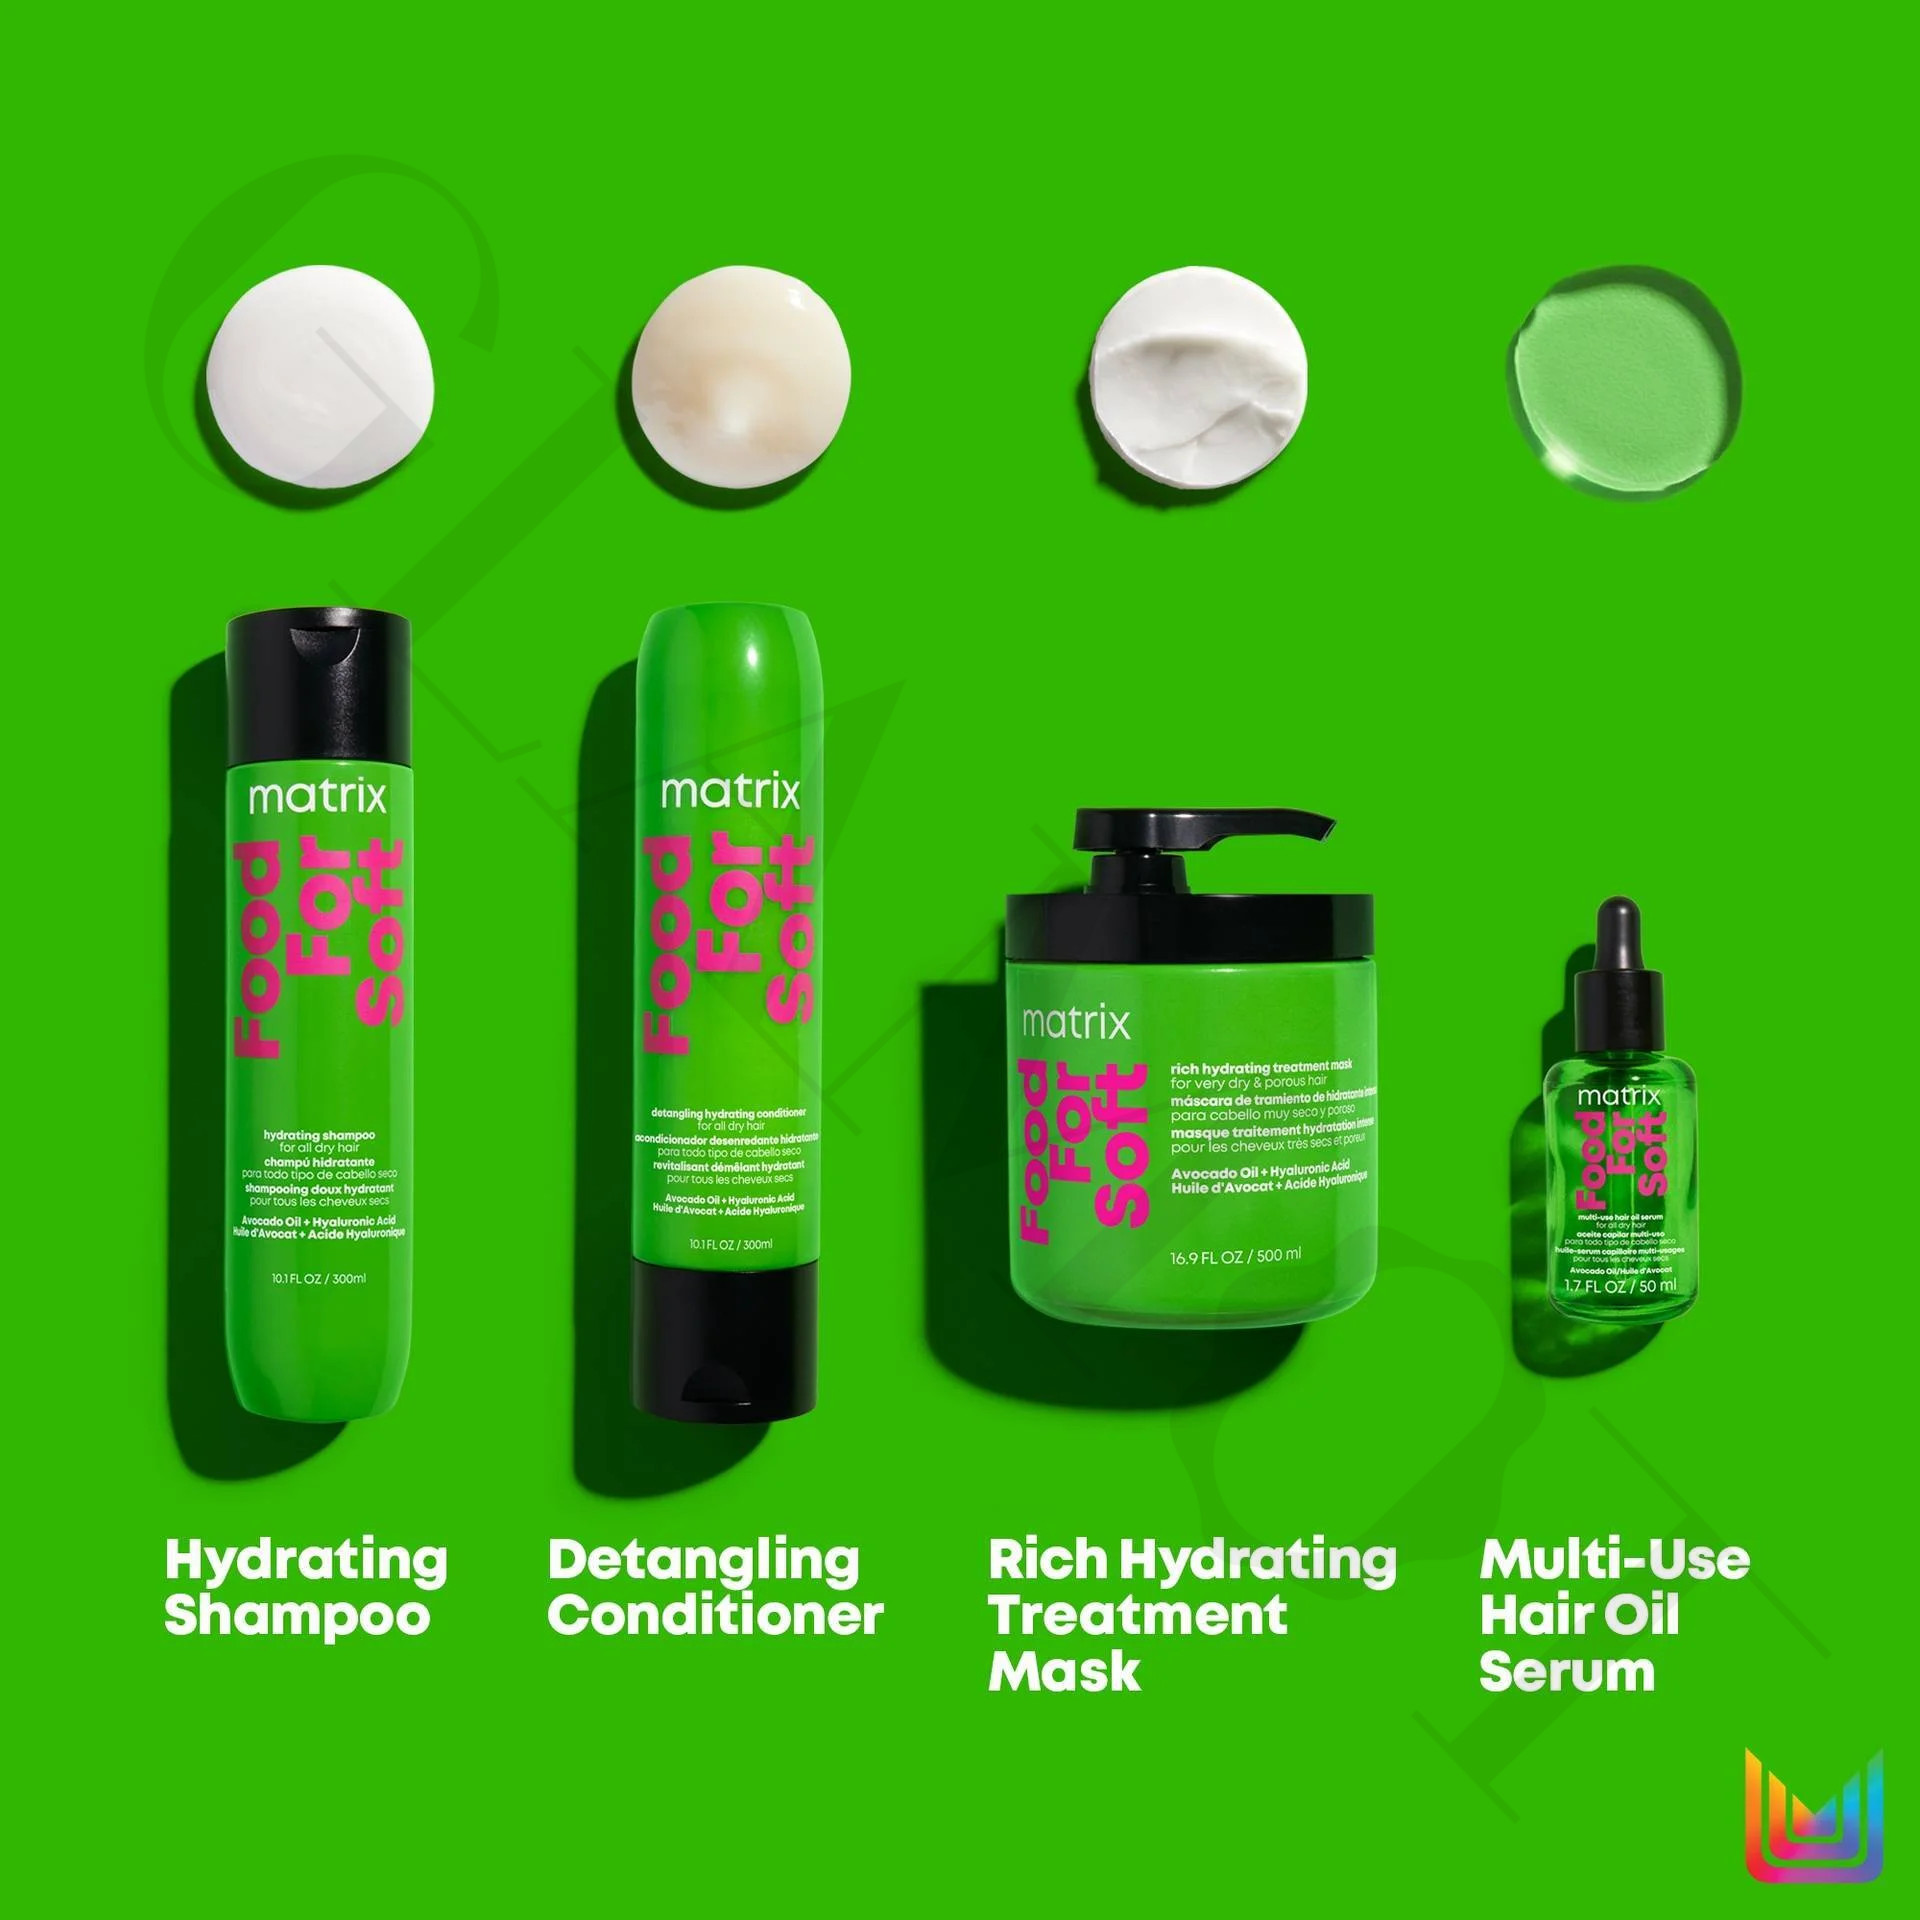 Matrix Products: Dry hair